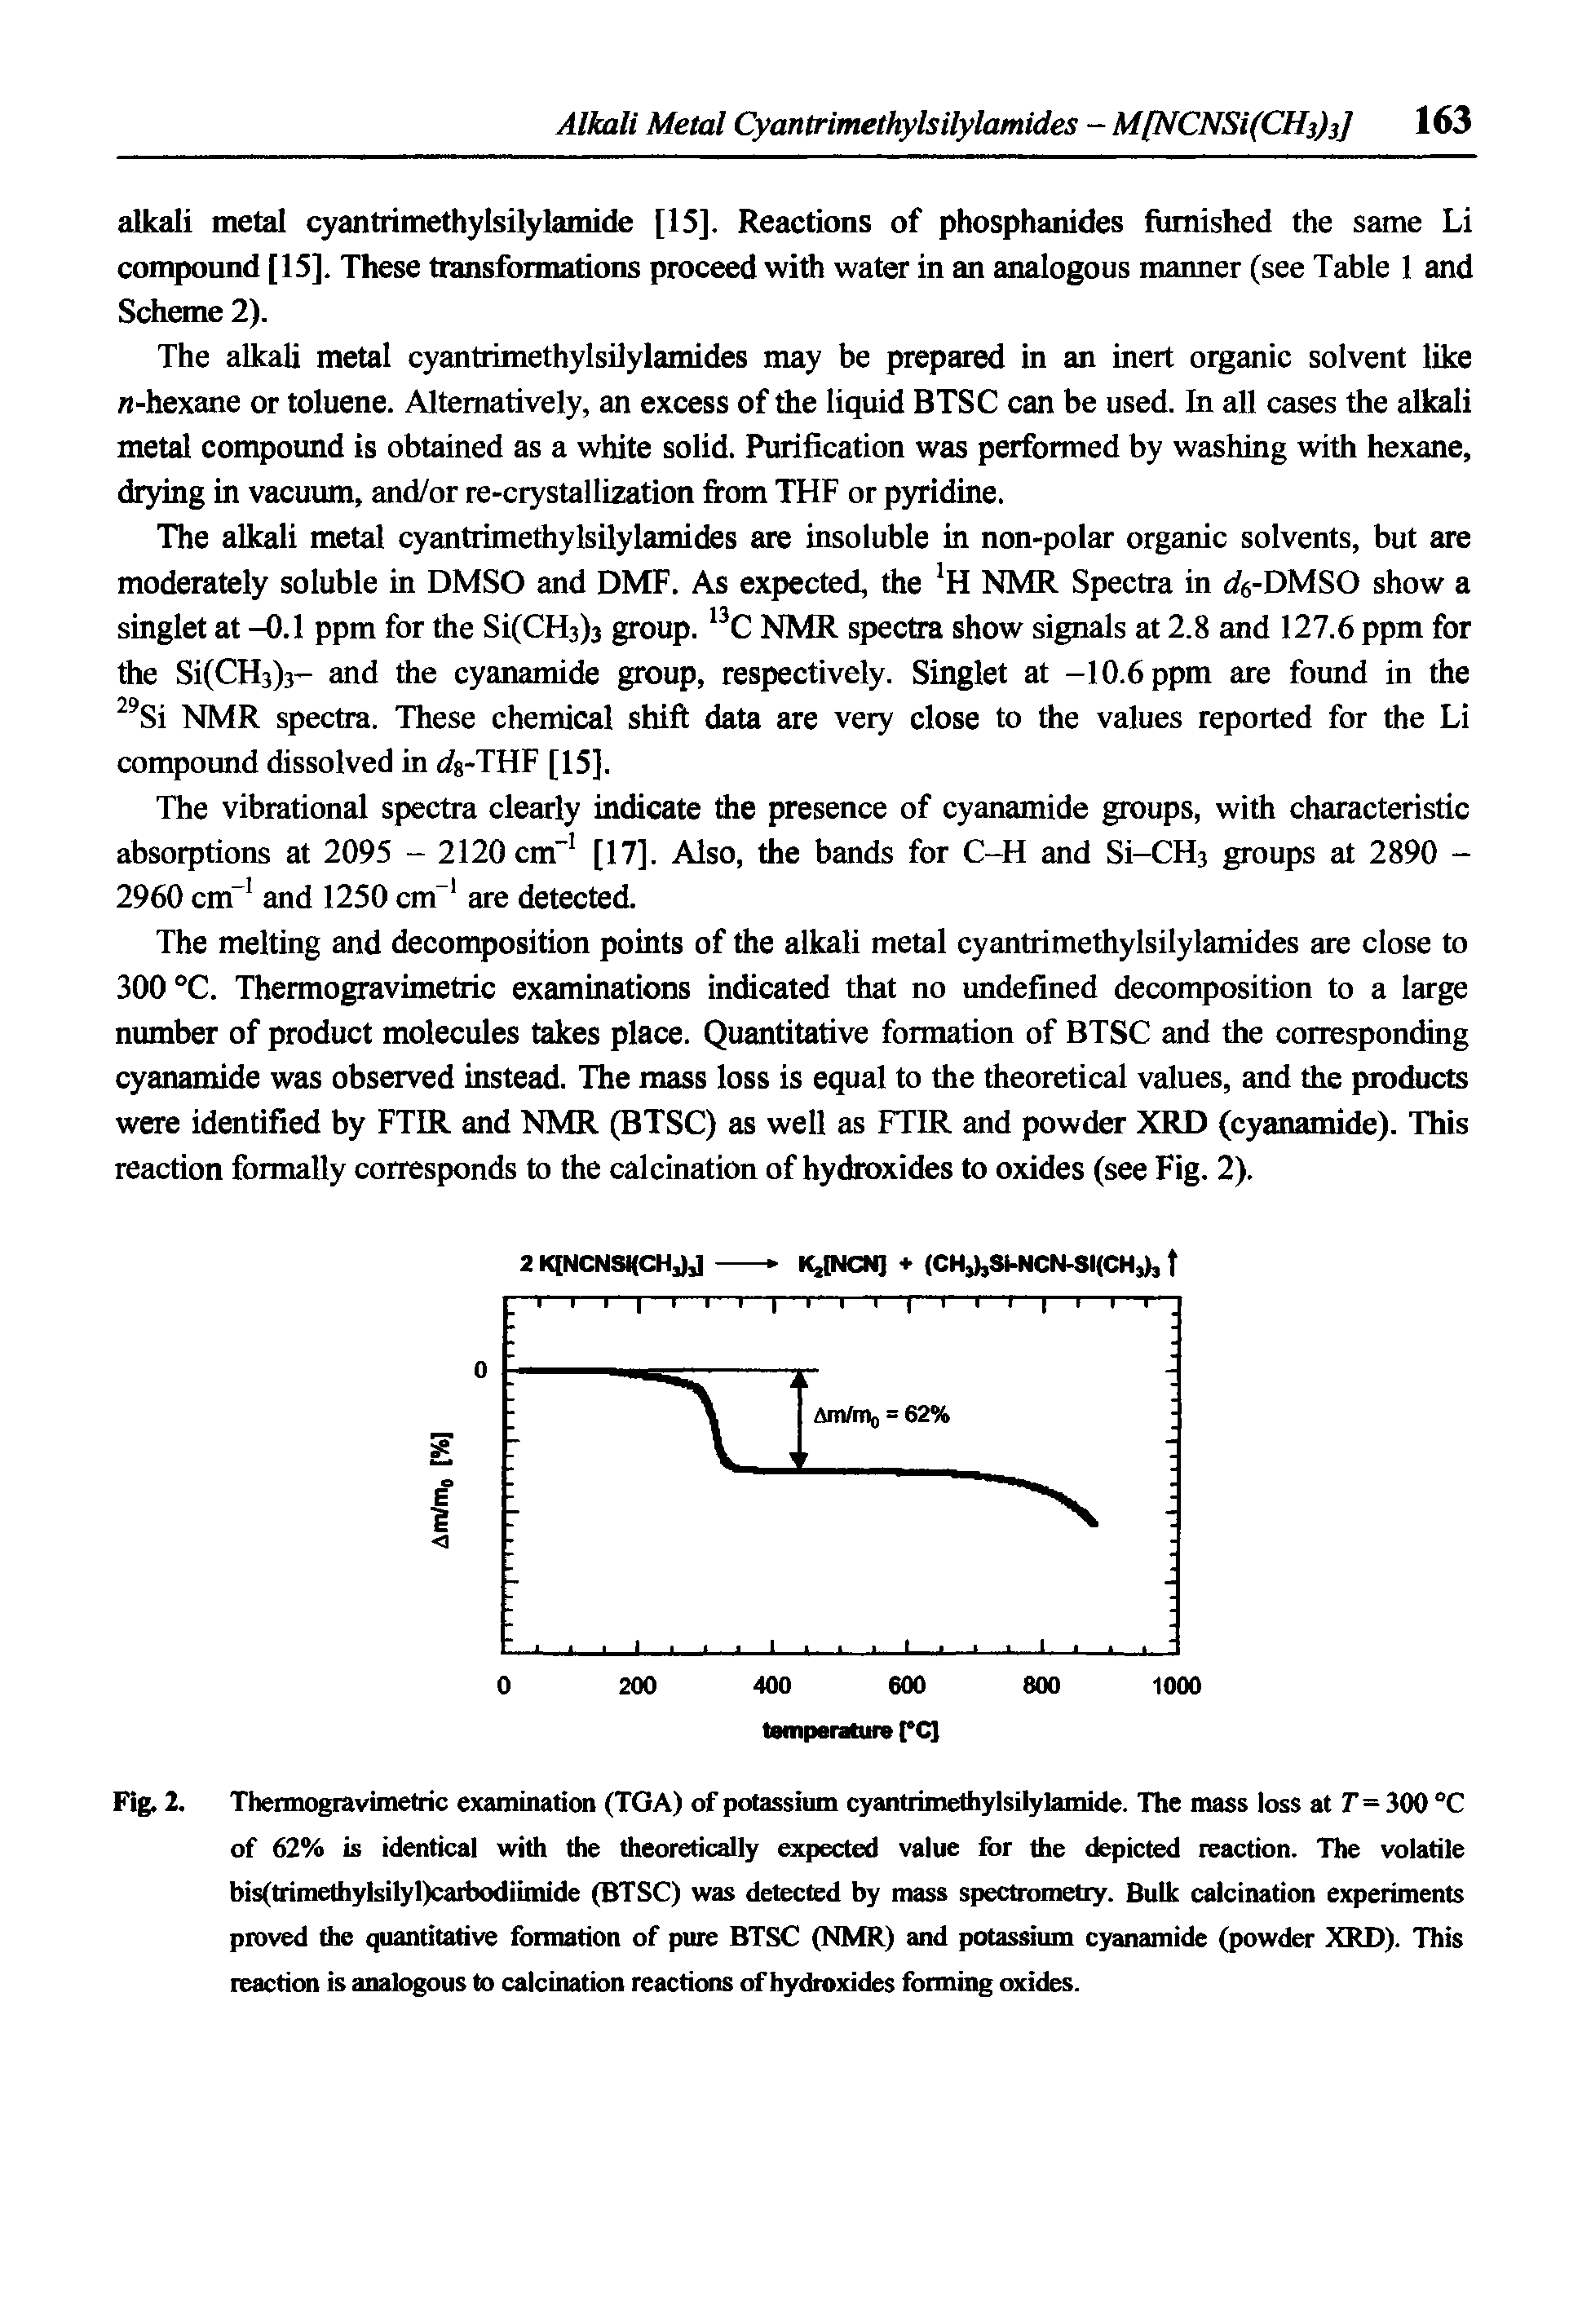 Fig. 2. Thermogravimetric examination (TGA) of potassium cyantrimethylsilylamide. The mass loss at T= 300 °C of 62% is identical with the theoretically expected value for the depicted reaction. The volatile bis(trimethylsilyl)carbodiimide (BTSC) was detected by mass spectrometry. Bulk calcination experiments proved the quantitative formation of pure BTSC (NMR) and potassium cyanamide (powder XRD). This reaction is analogous to calcination reactions of hydroxides forming oxides.